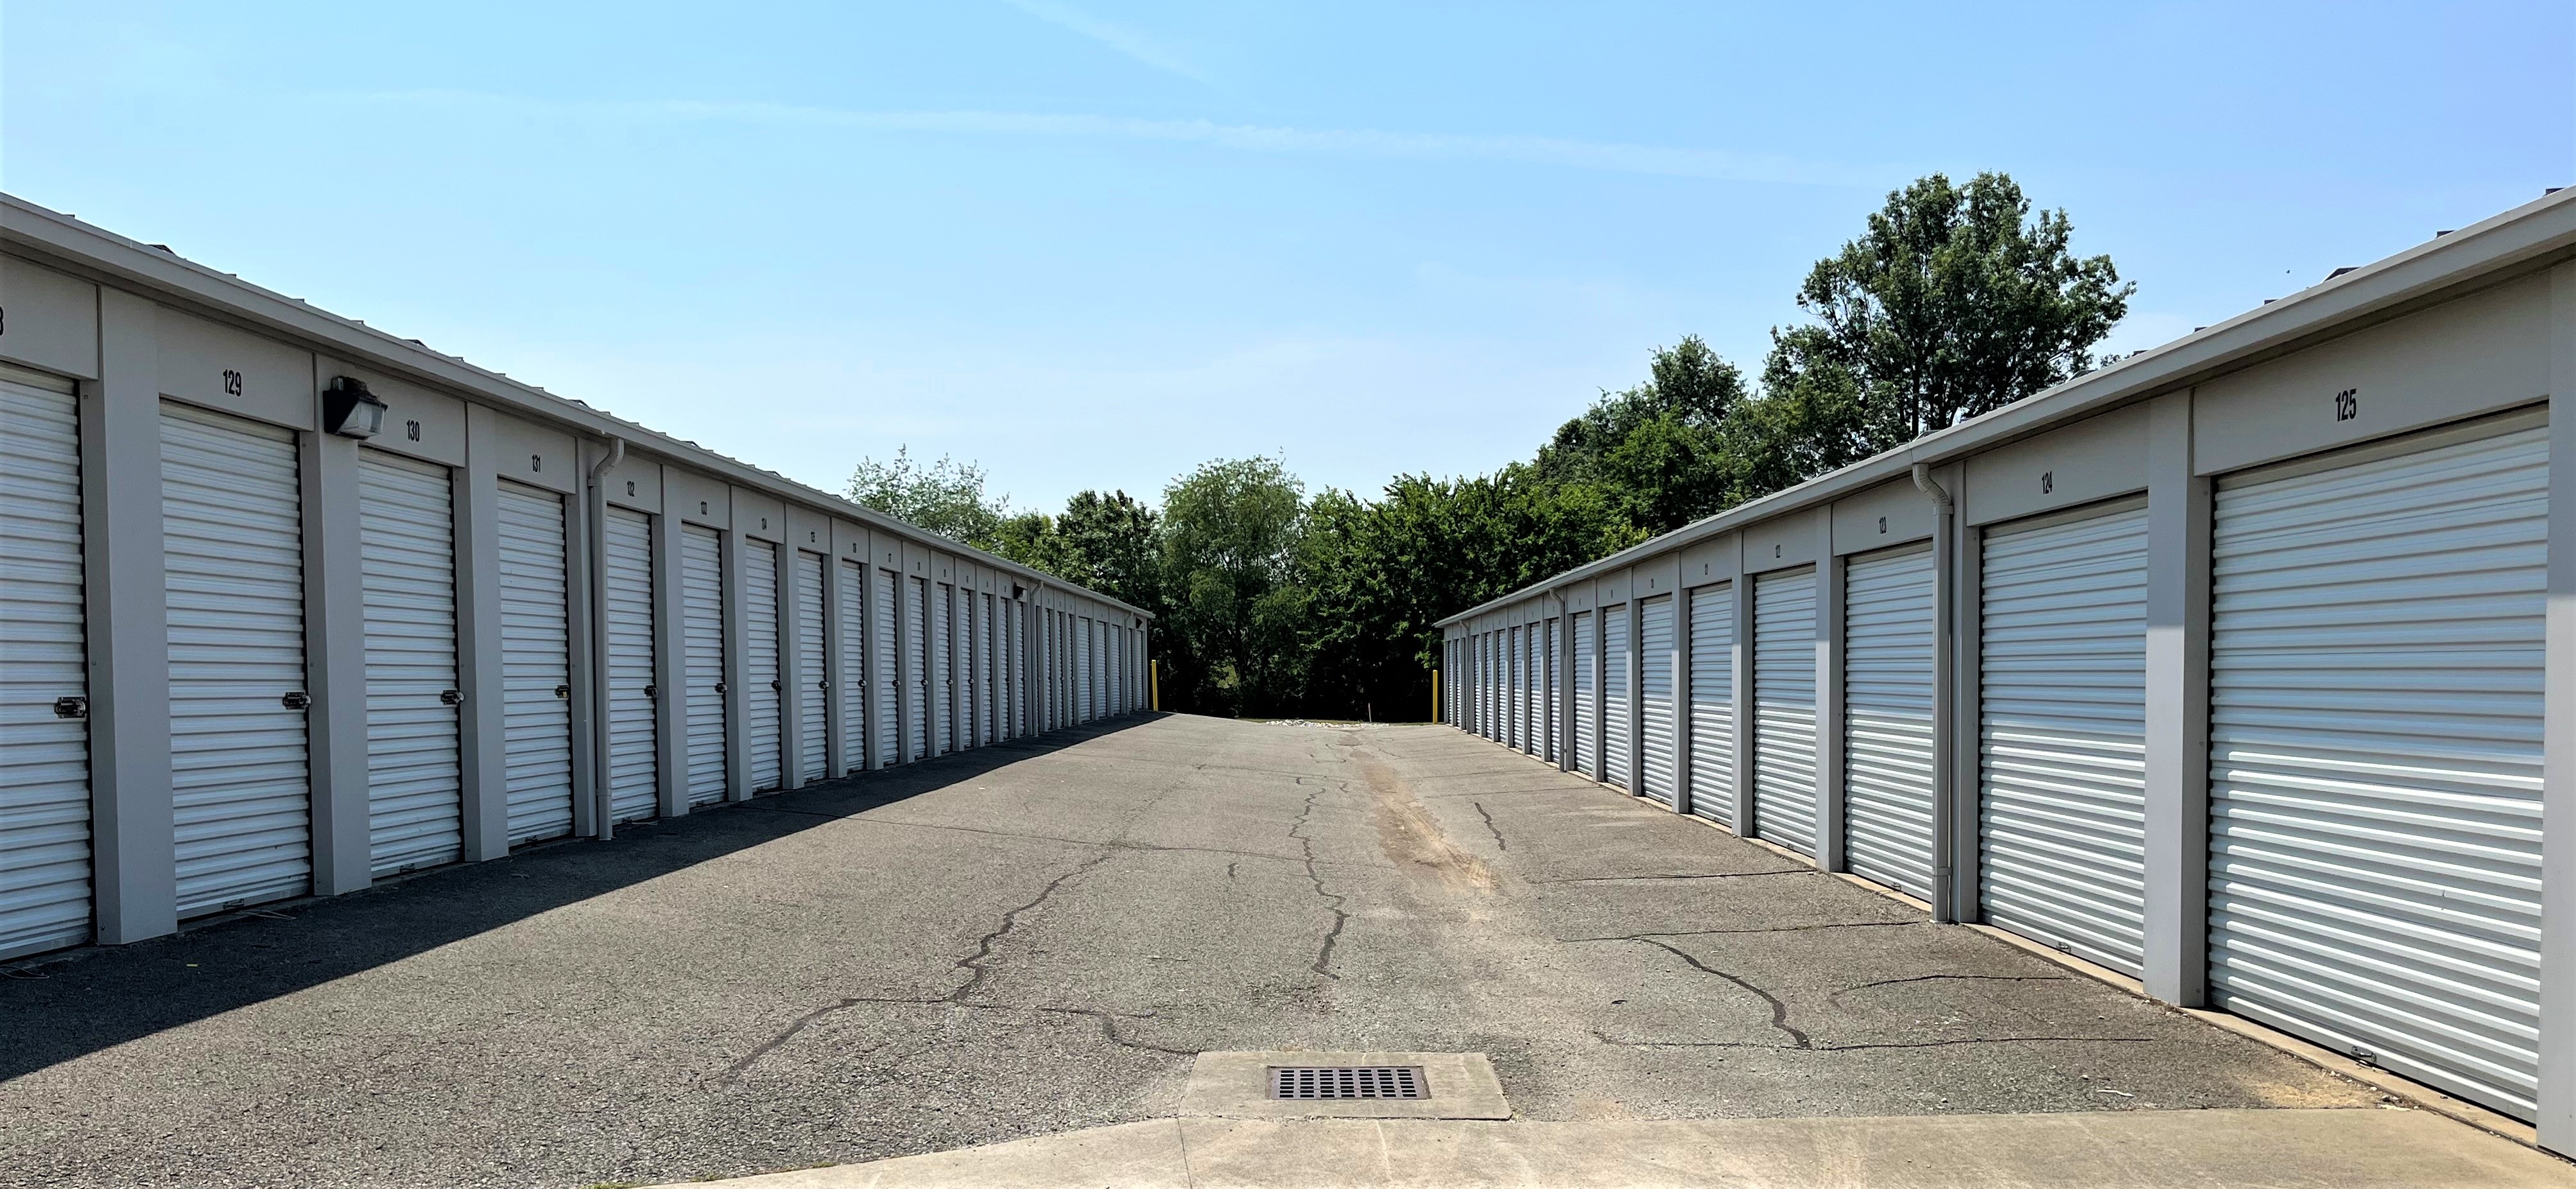 Wide driveways leading to large, versatile storage units and vehicle parking, all with white doors at Mississippi St facility.